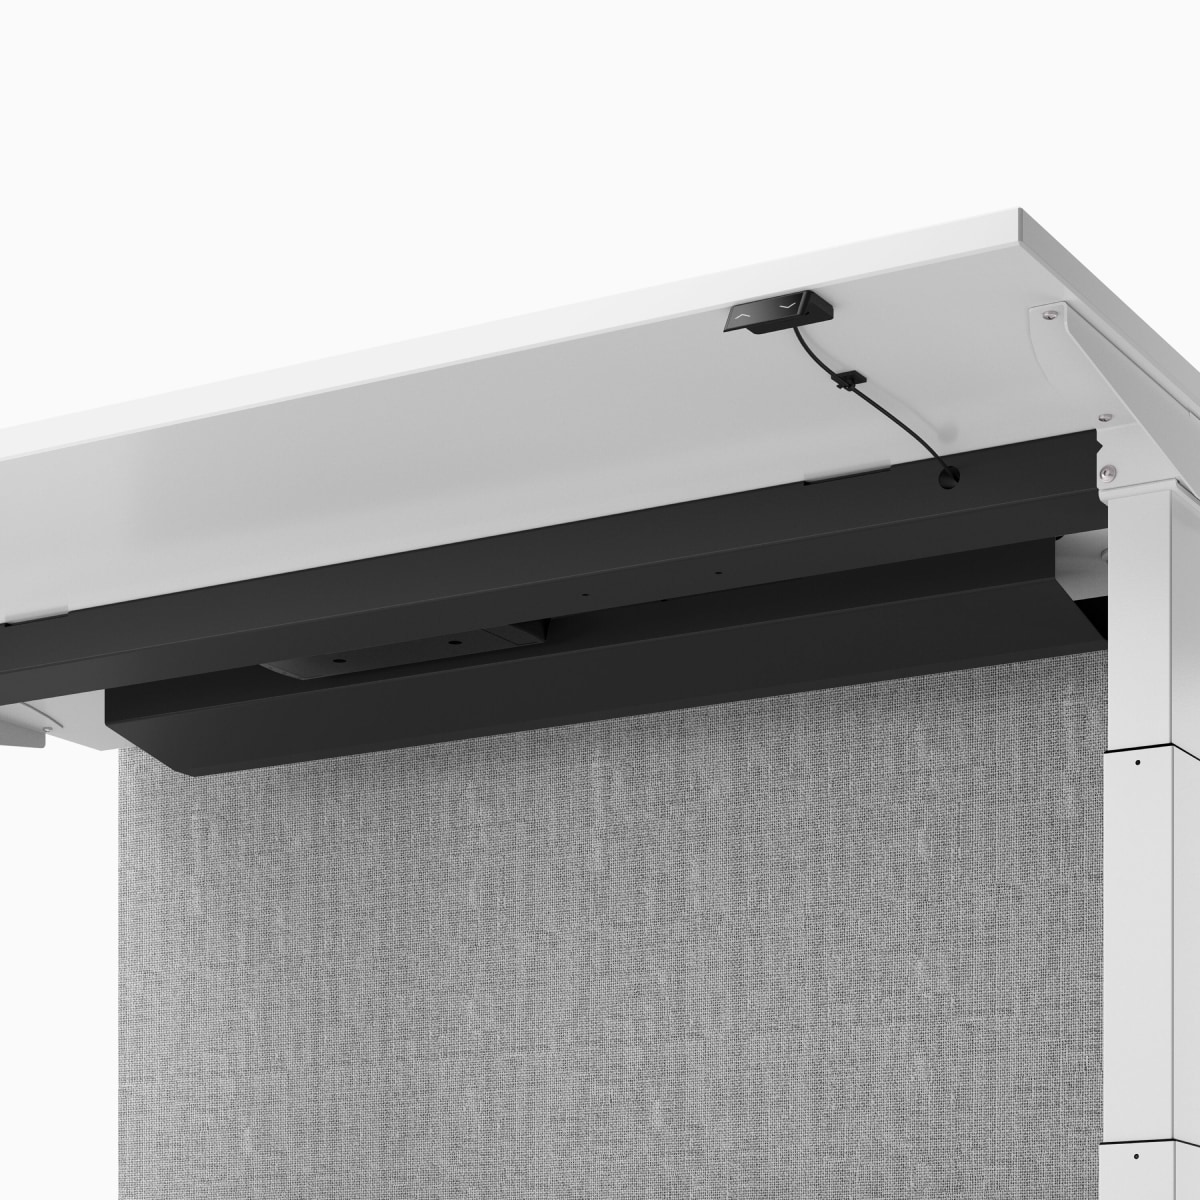 A close-up view of underneath a white Nevi Link desk raised to standing height and showing the upper cable tray and grey fabric screen.